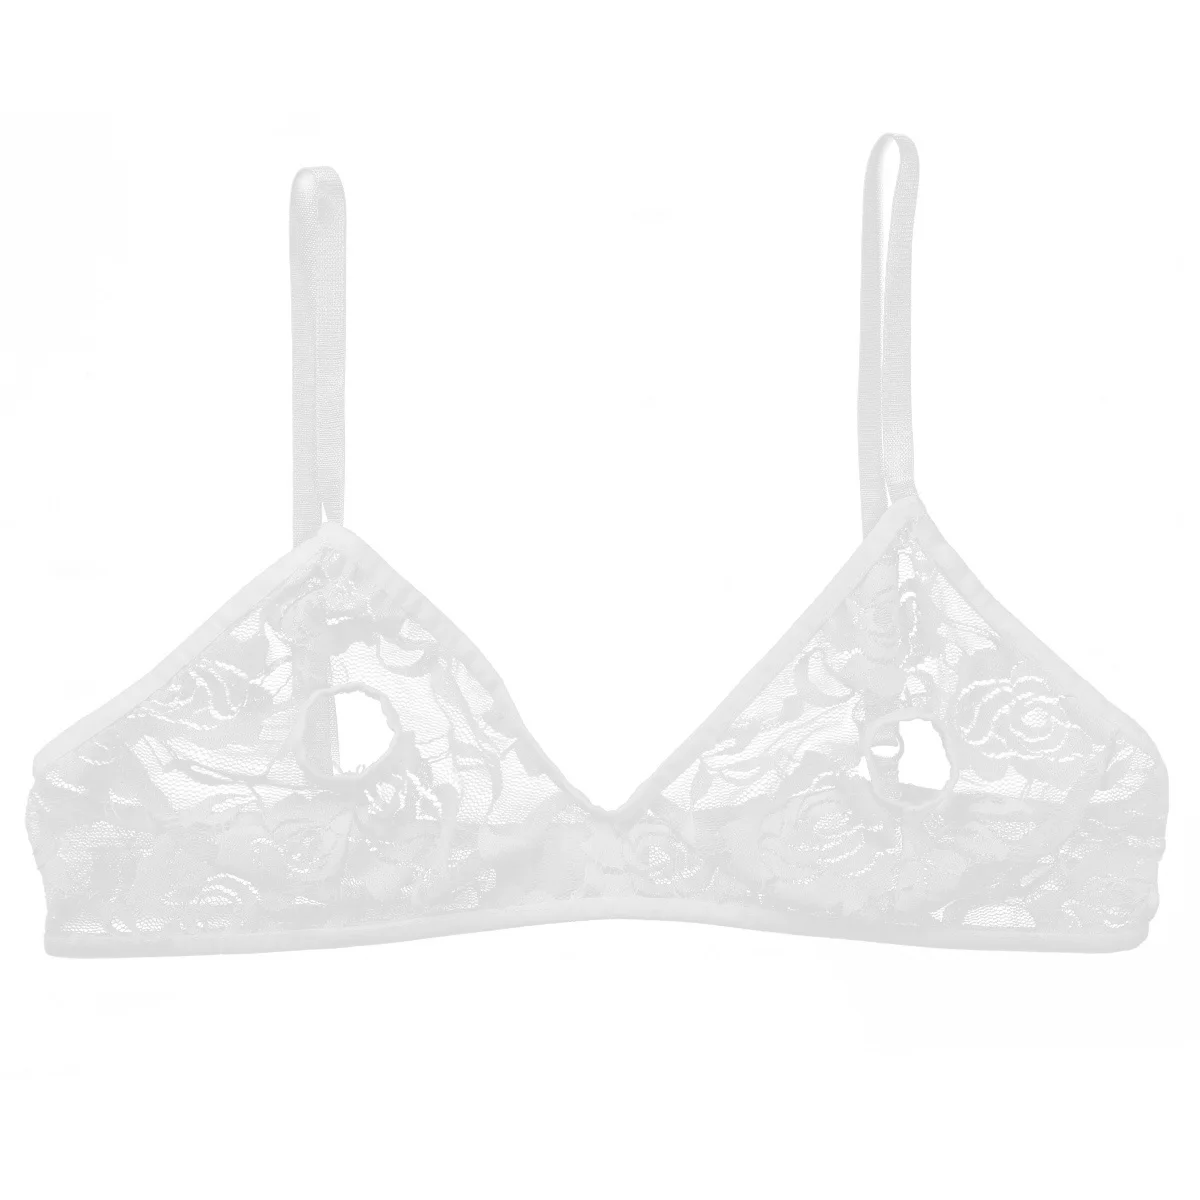 MSemis Womans Lace Sheer Push Up Quarter Cup Hollow Out Bra Top Harness Cage Bralette Lingerie 